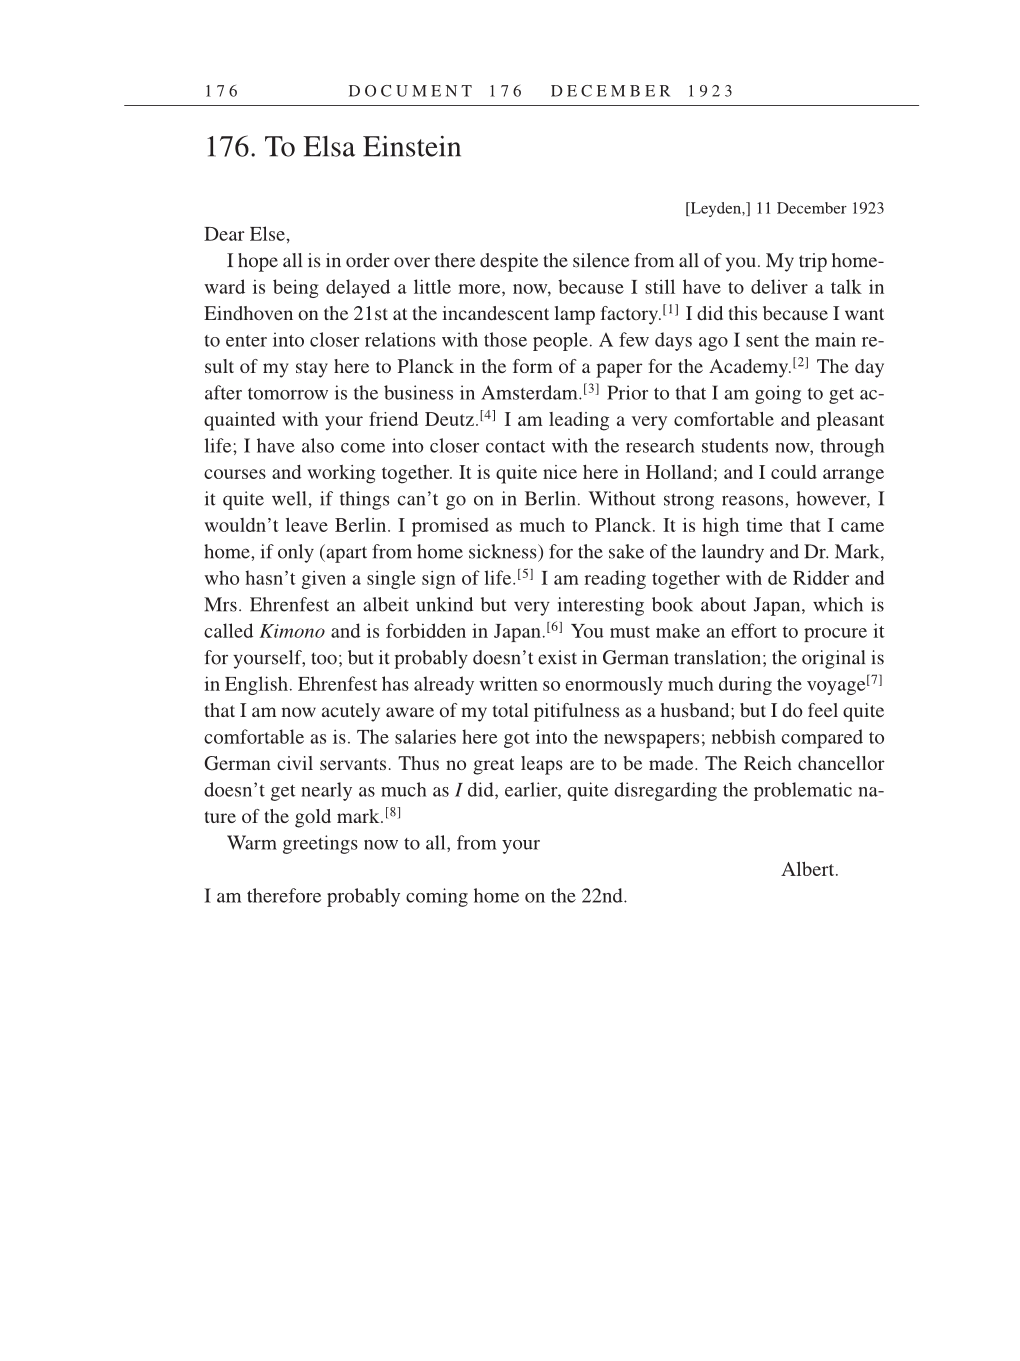 Volume 14: The Berlin Years: Writings & Correspondence, April 1923-May 1925 (English Translation Supplement) page 176